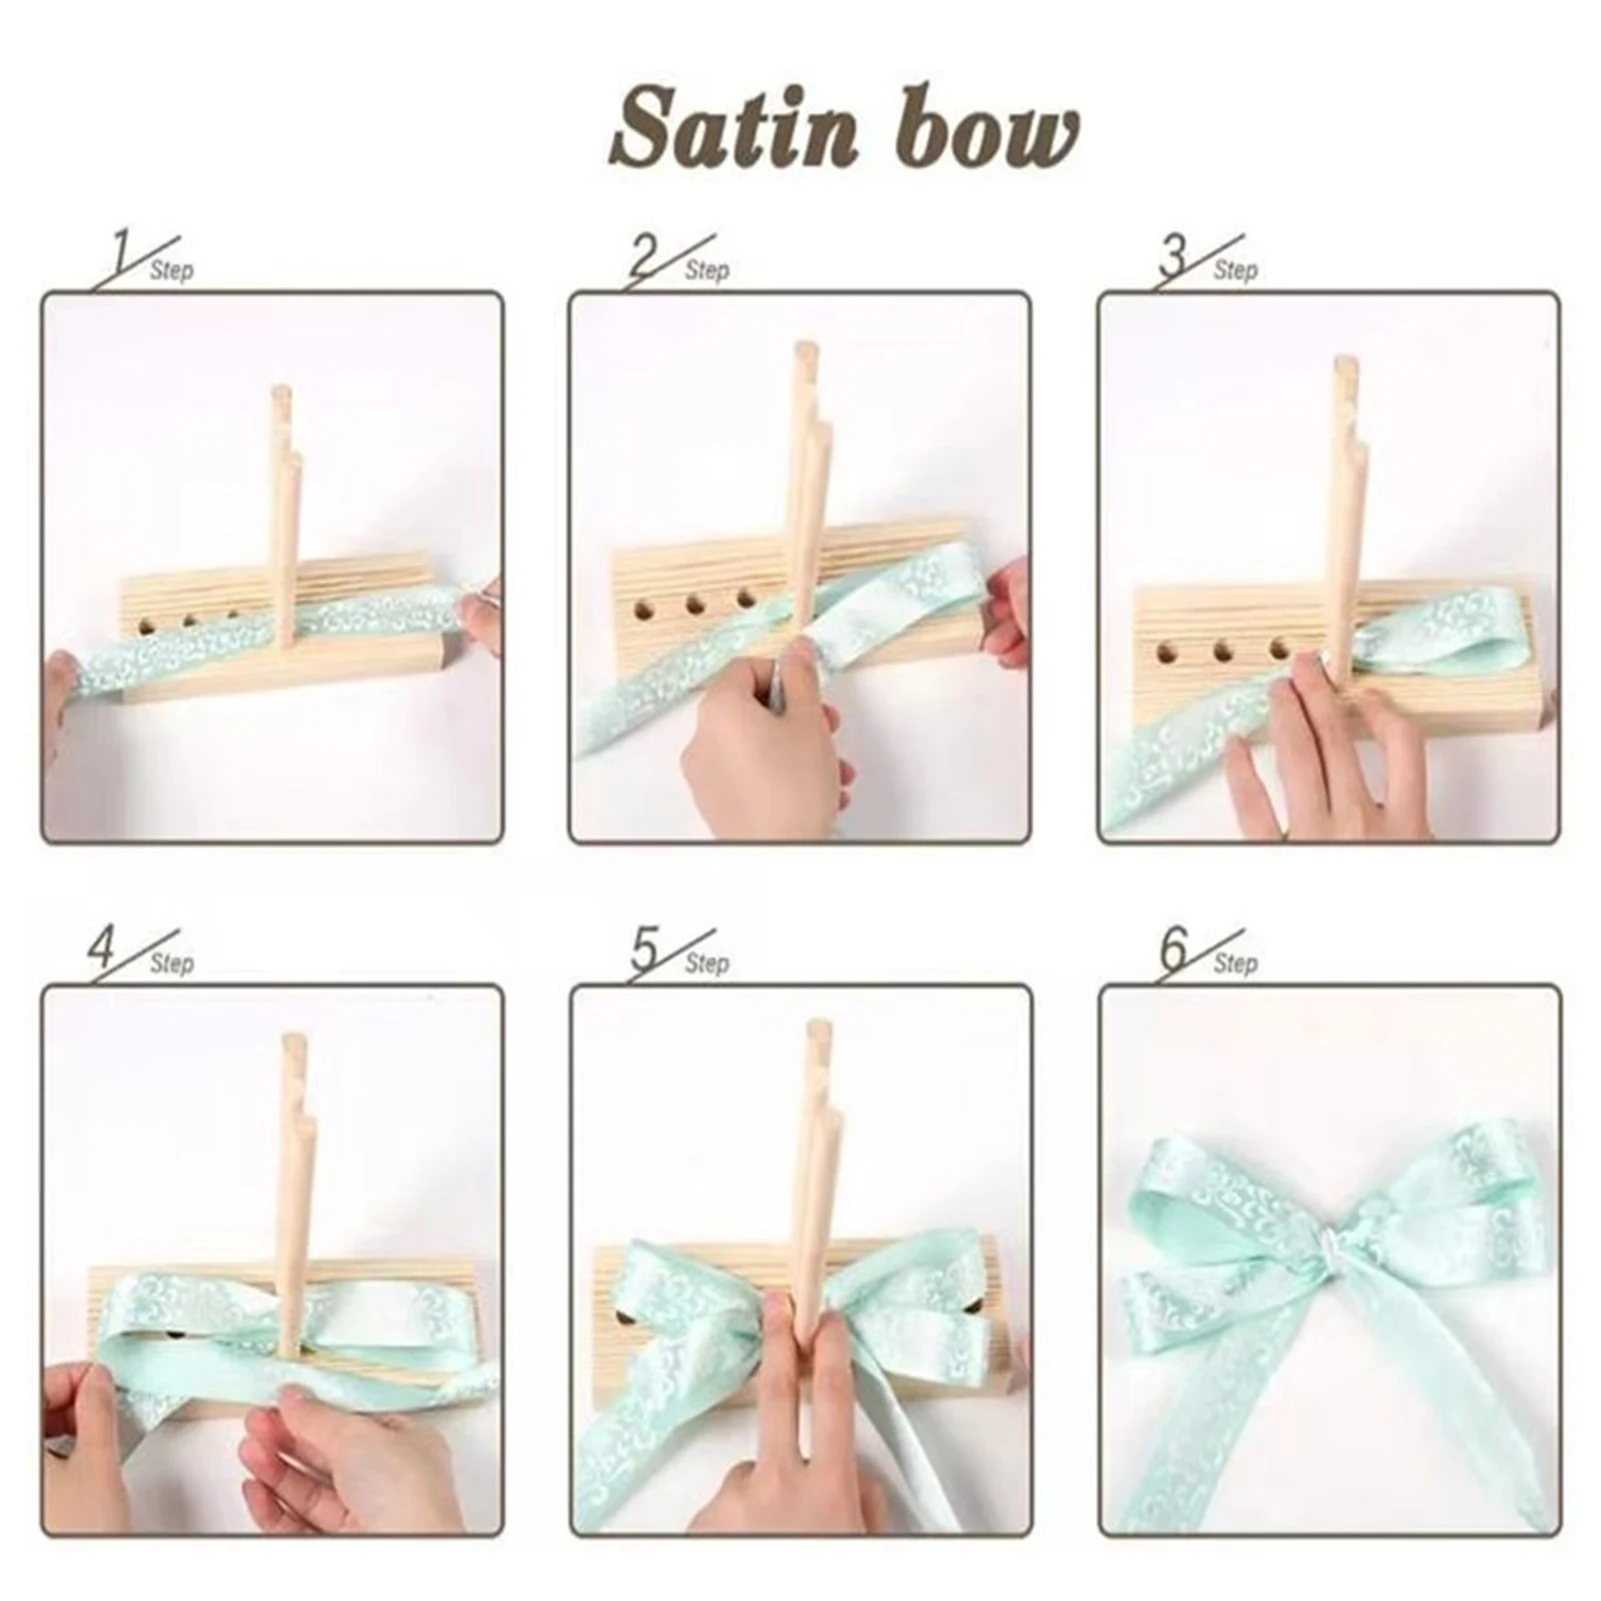 Bow Maker Wooden Wreath Bowing Making Tool Party DIY Kinds of Bow Maker for  Ribbon Crafts Party Wedding Decoration